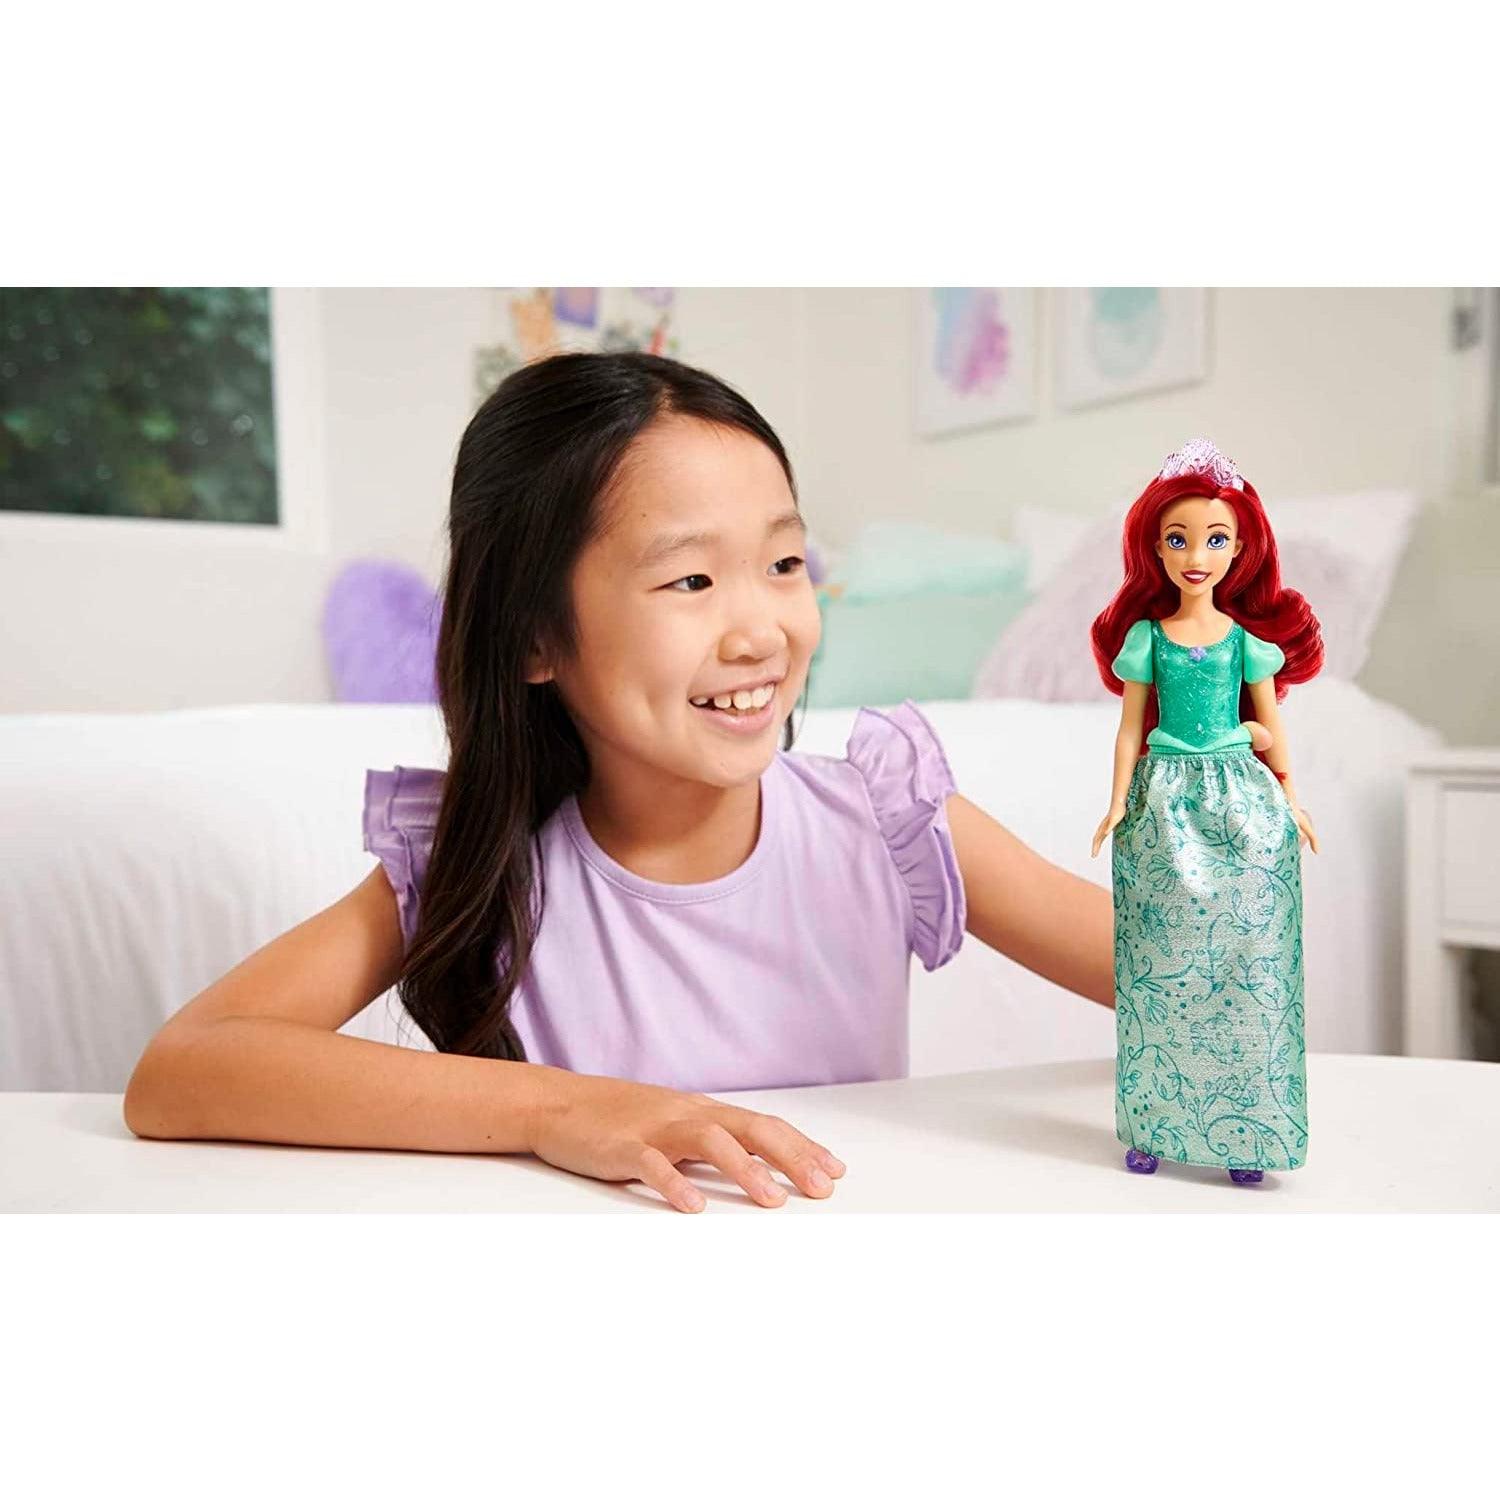 Disney Princess Dolls, New for 2023, Ariel Posable Fashion Doll with Sparkling Clothing and Accessories, Disney Movie Toys - BumbleToys - 5-7 Years, Ariel, Disney, Disney Princess, Fashion Dolls & Accessories, Girls